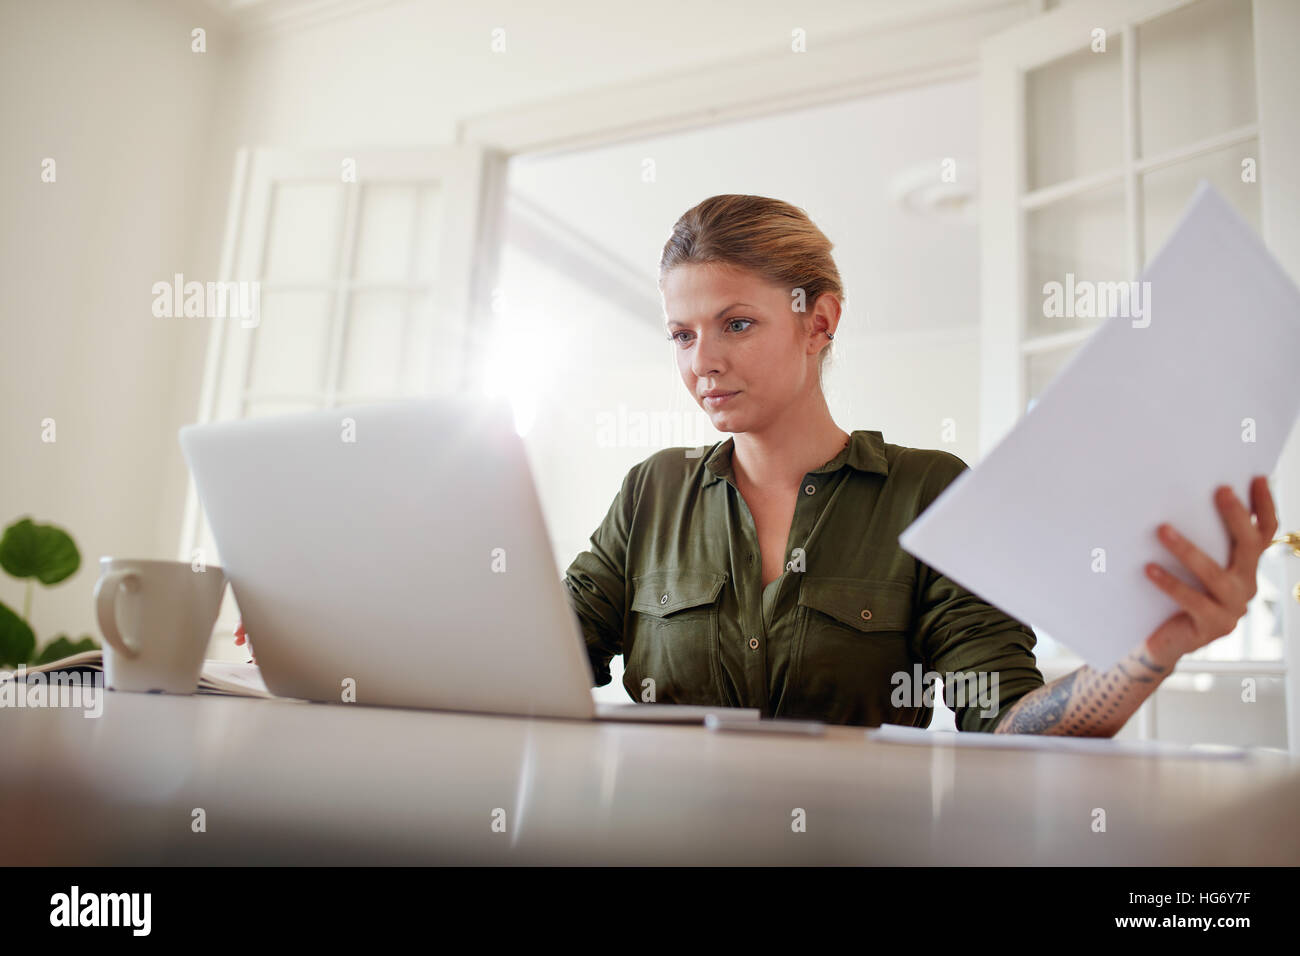 Portrait of young female sitting at table holding documents and working on laptop. Woman busy working at home office. Stock Photo